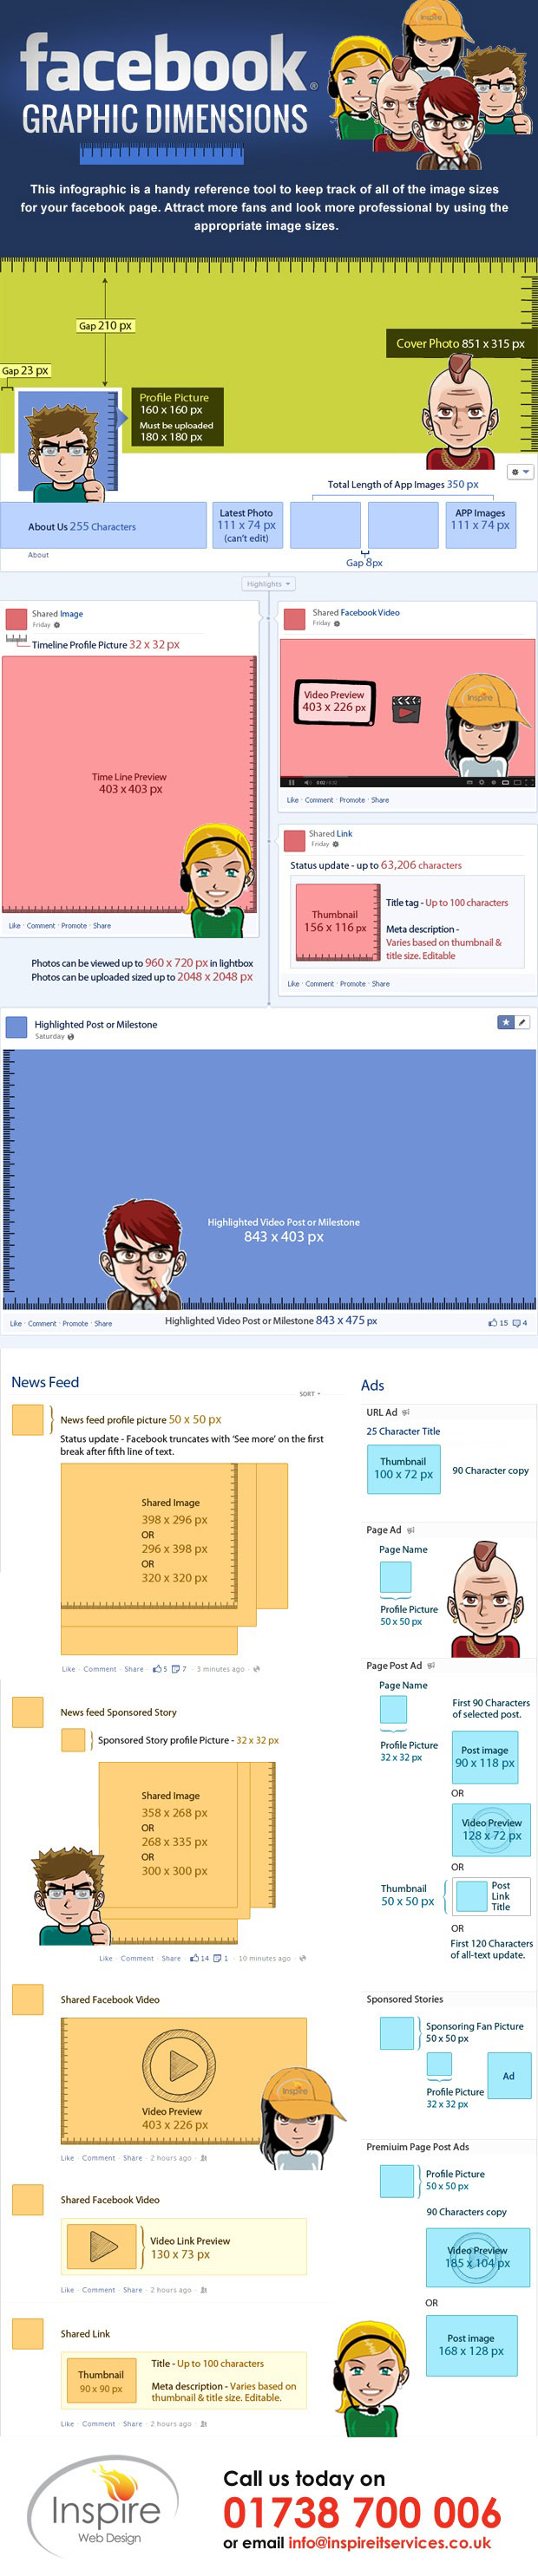 This Info graphic is a handy reference tool to keep track of all the image sizes for your Facebook page.